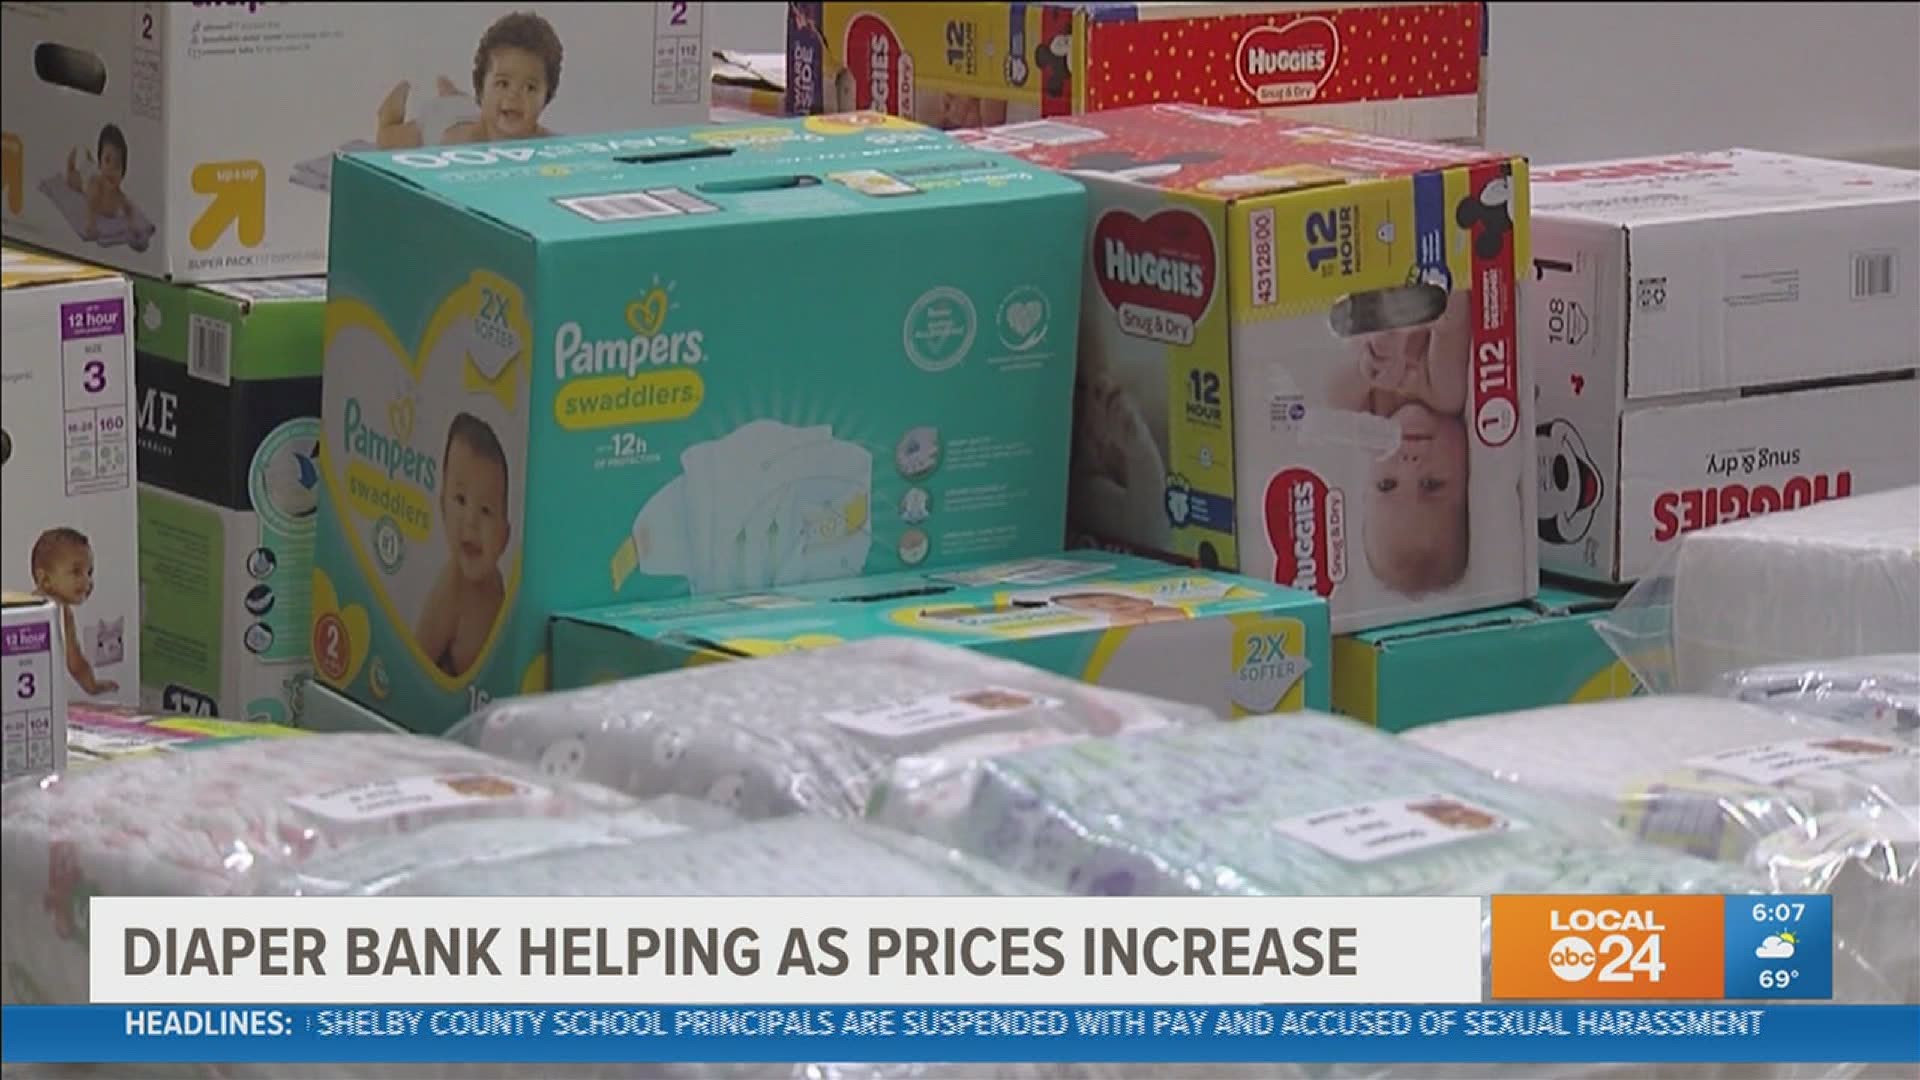 The Bare Needs Diaper Bank is stocking up ahead of diaper price hikes to help families in need